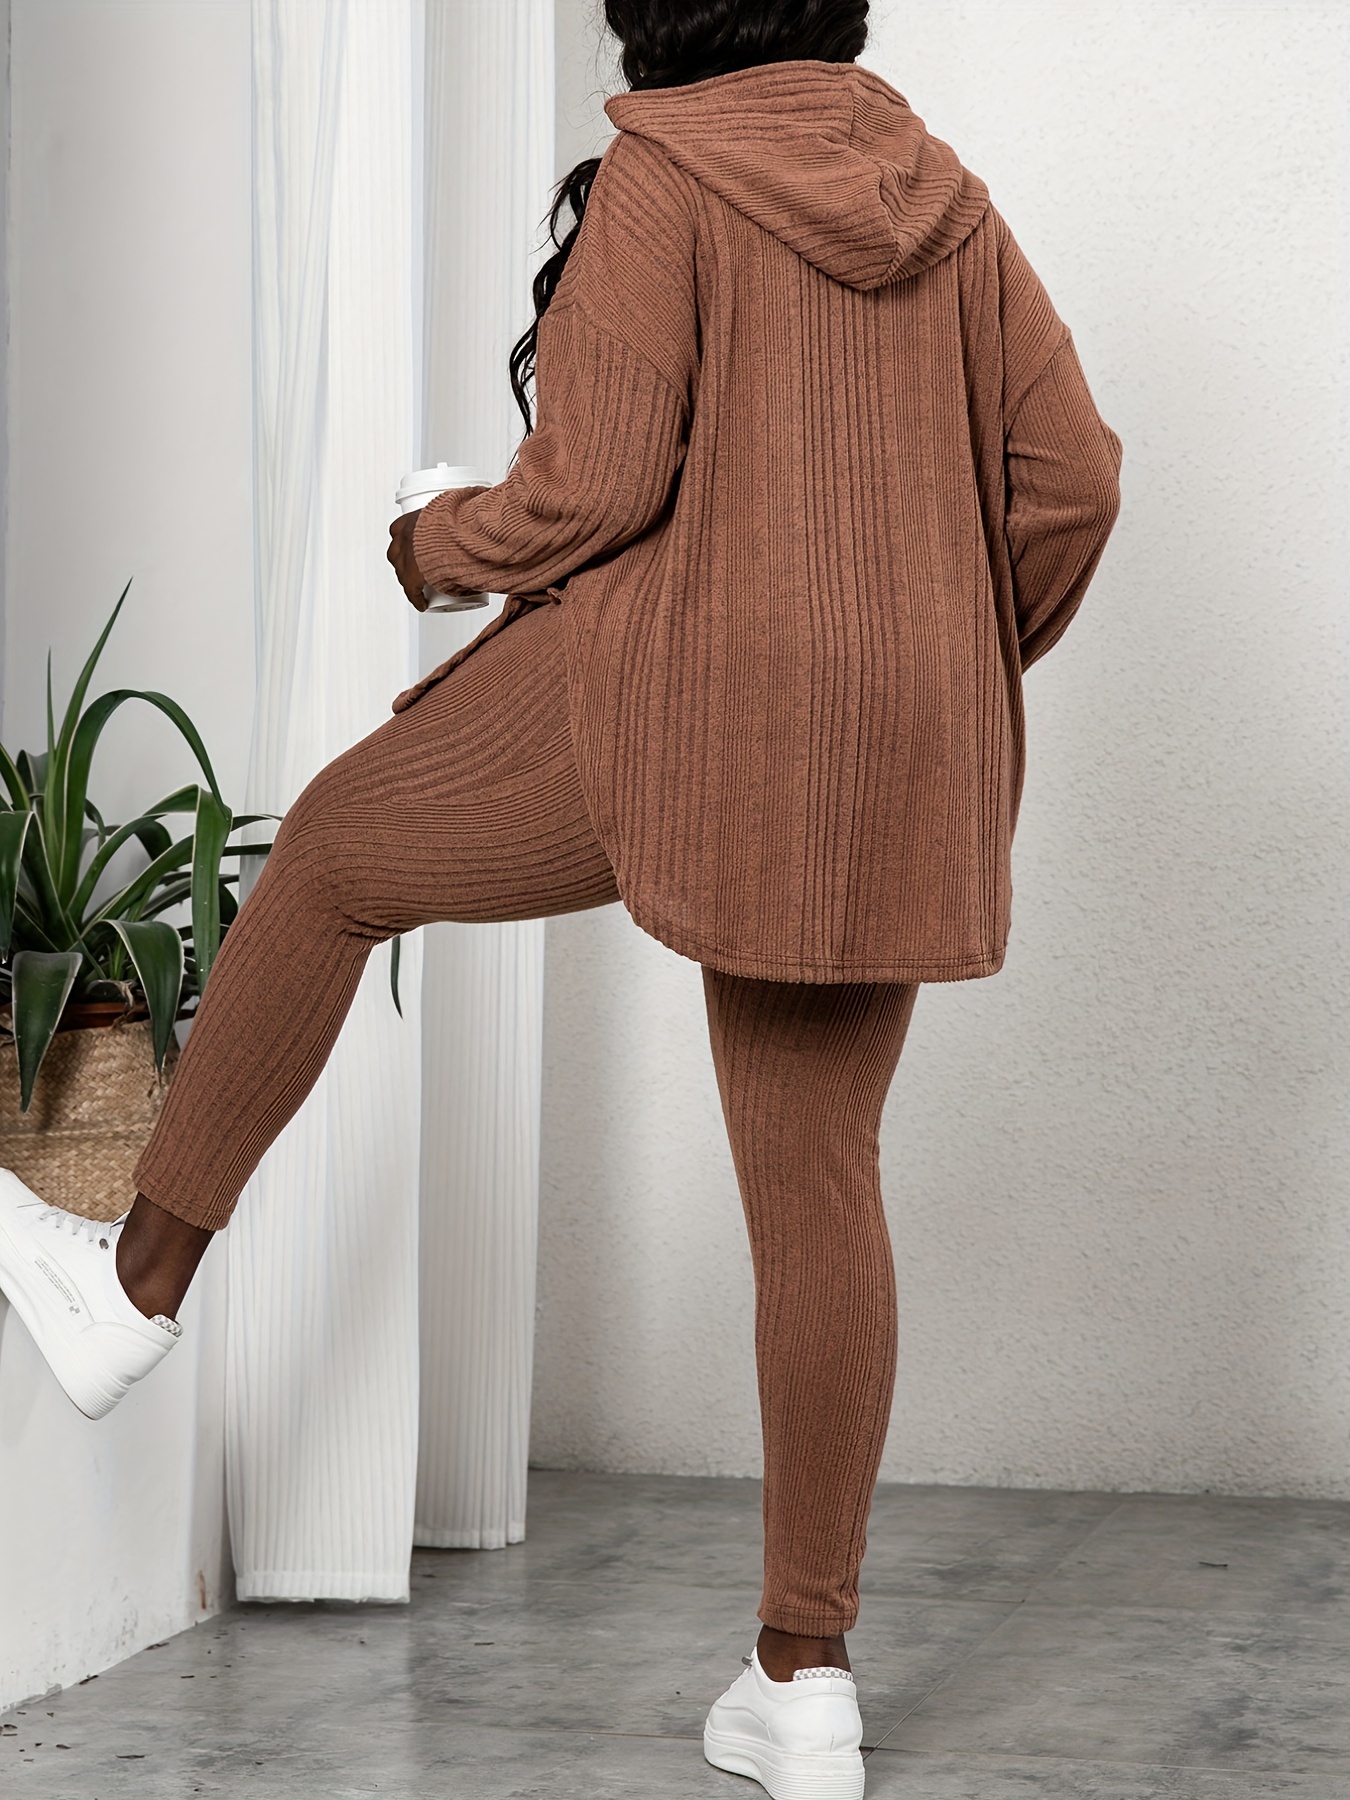 Plus Size Rib Knit Solid Long Sleeve Hoodie Tops & Leggings Set; Women's  Plus High Stretch Casual 2pcs Set Co-ords